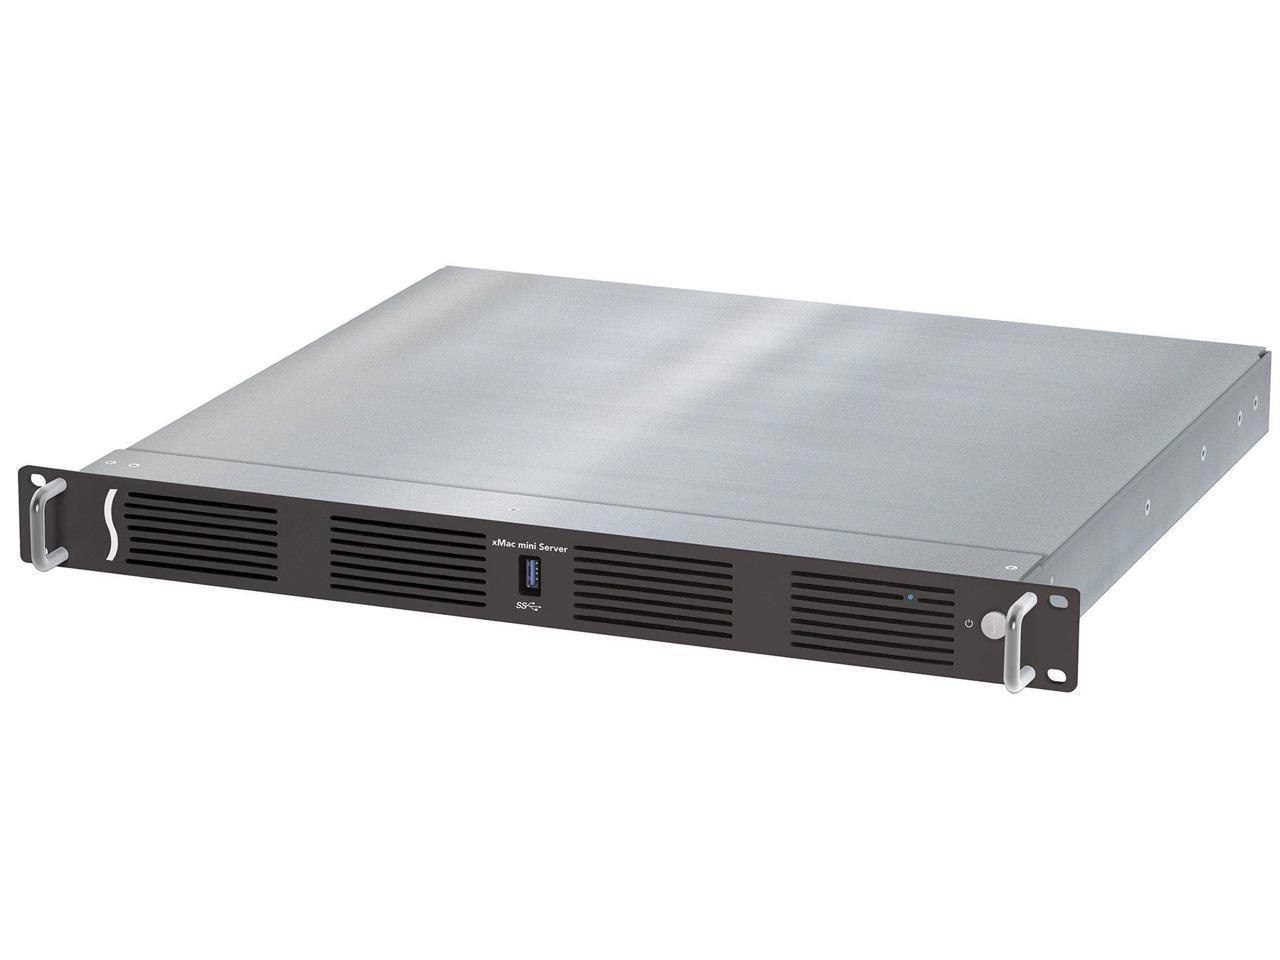 Sonnet Technologies Sonnet xMac Mini Server With One Full-Length And One Half-Length Slot Thunderbolt 3 Edition (Xmac-Ms-A-Tb3)